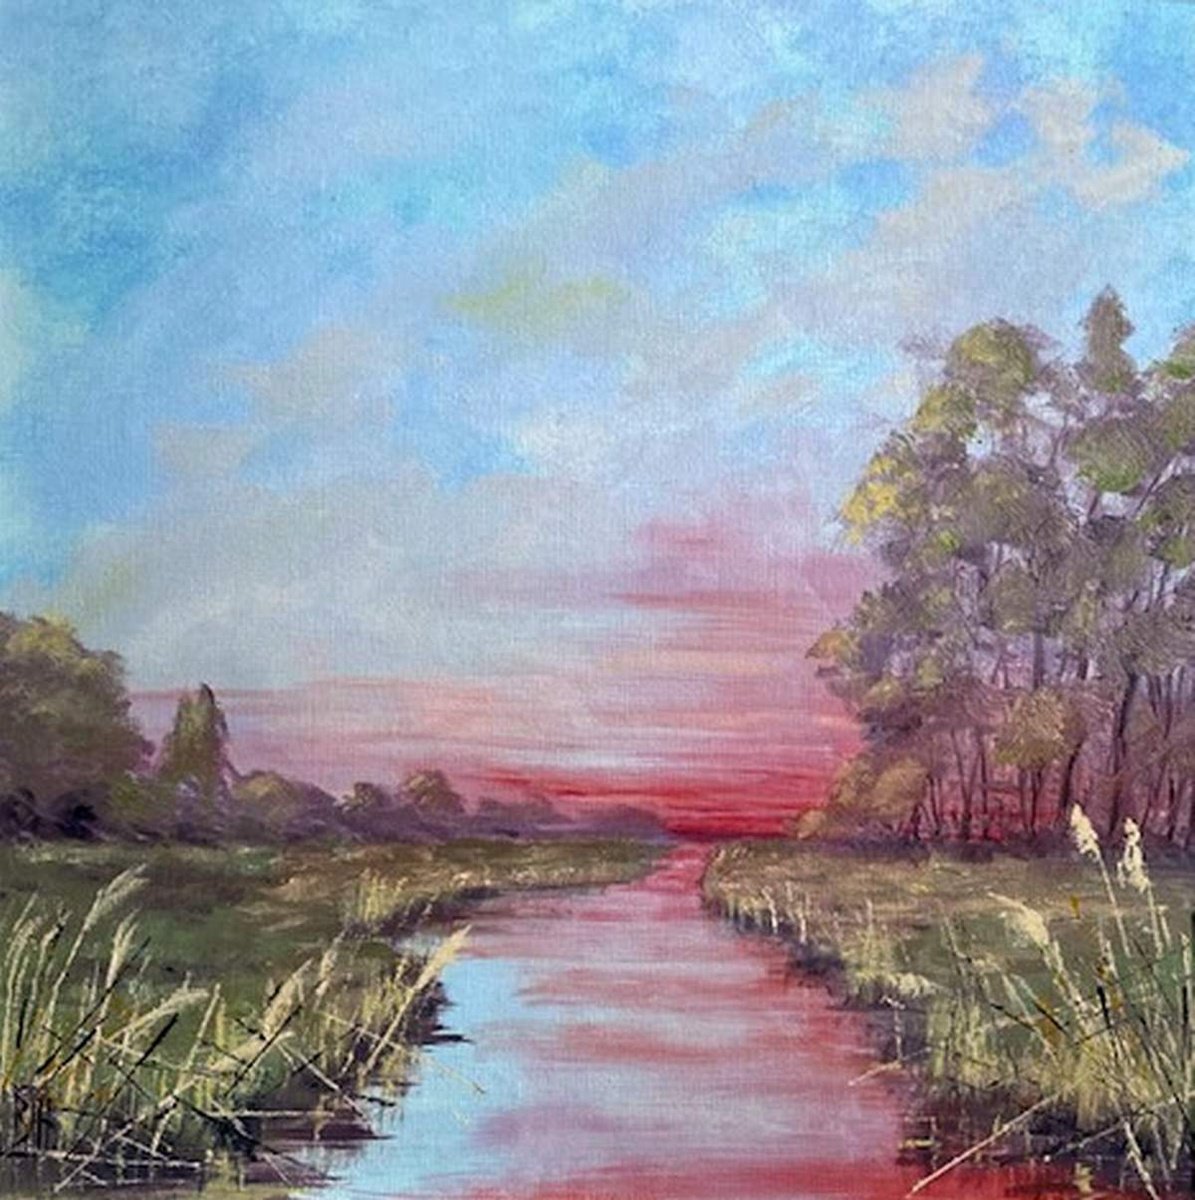 SUNSET IN THE FENS by BARBARA HARLOW